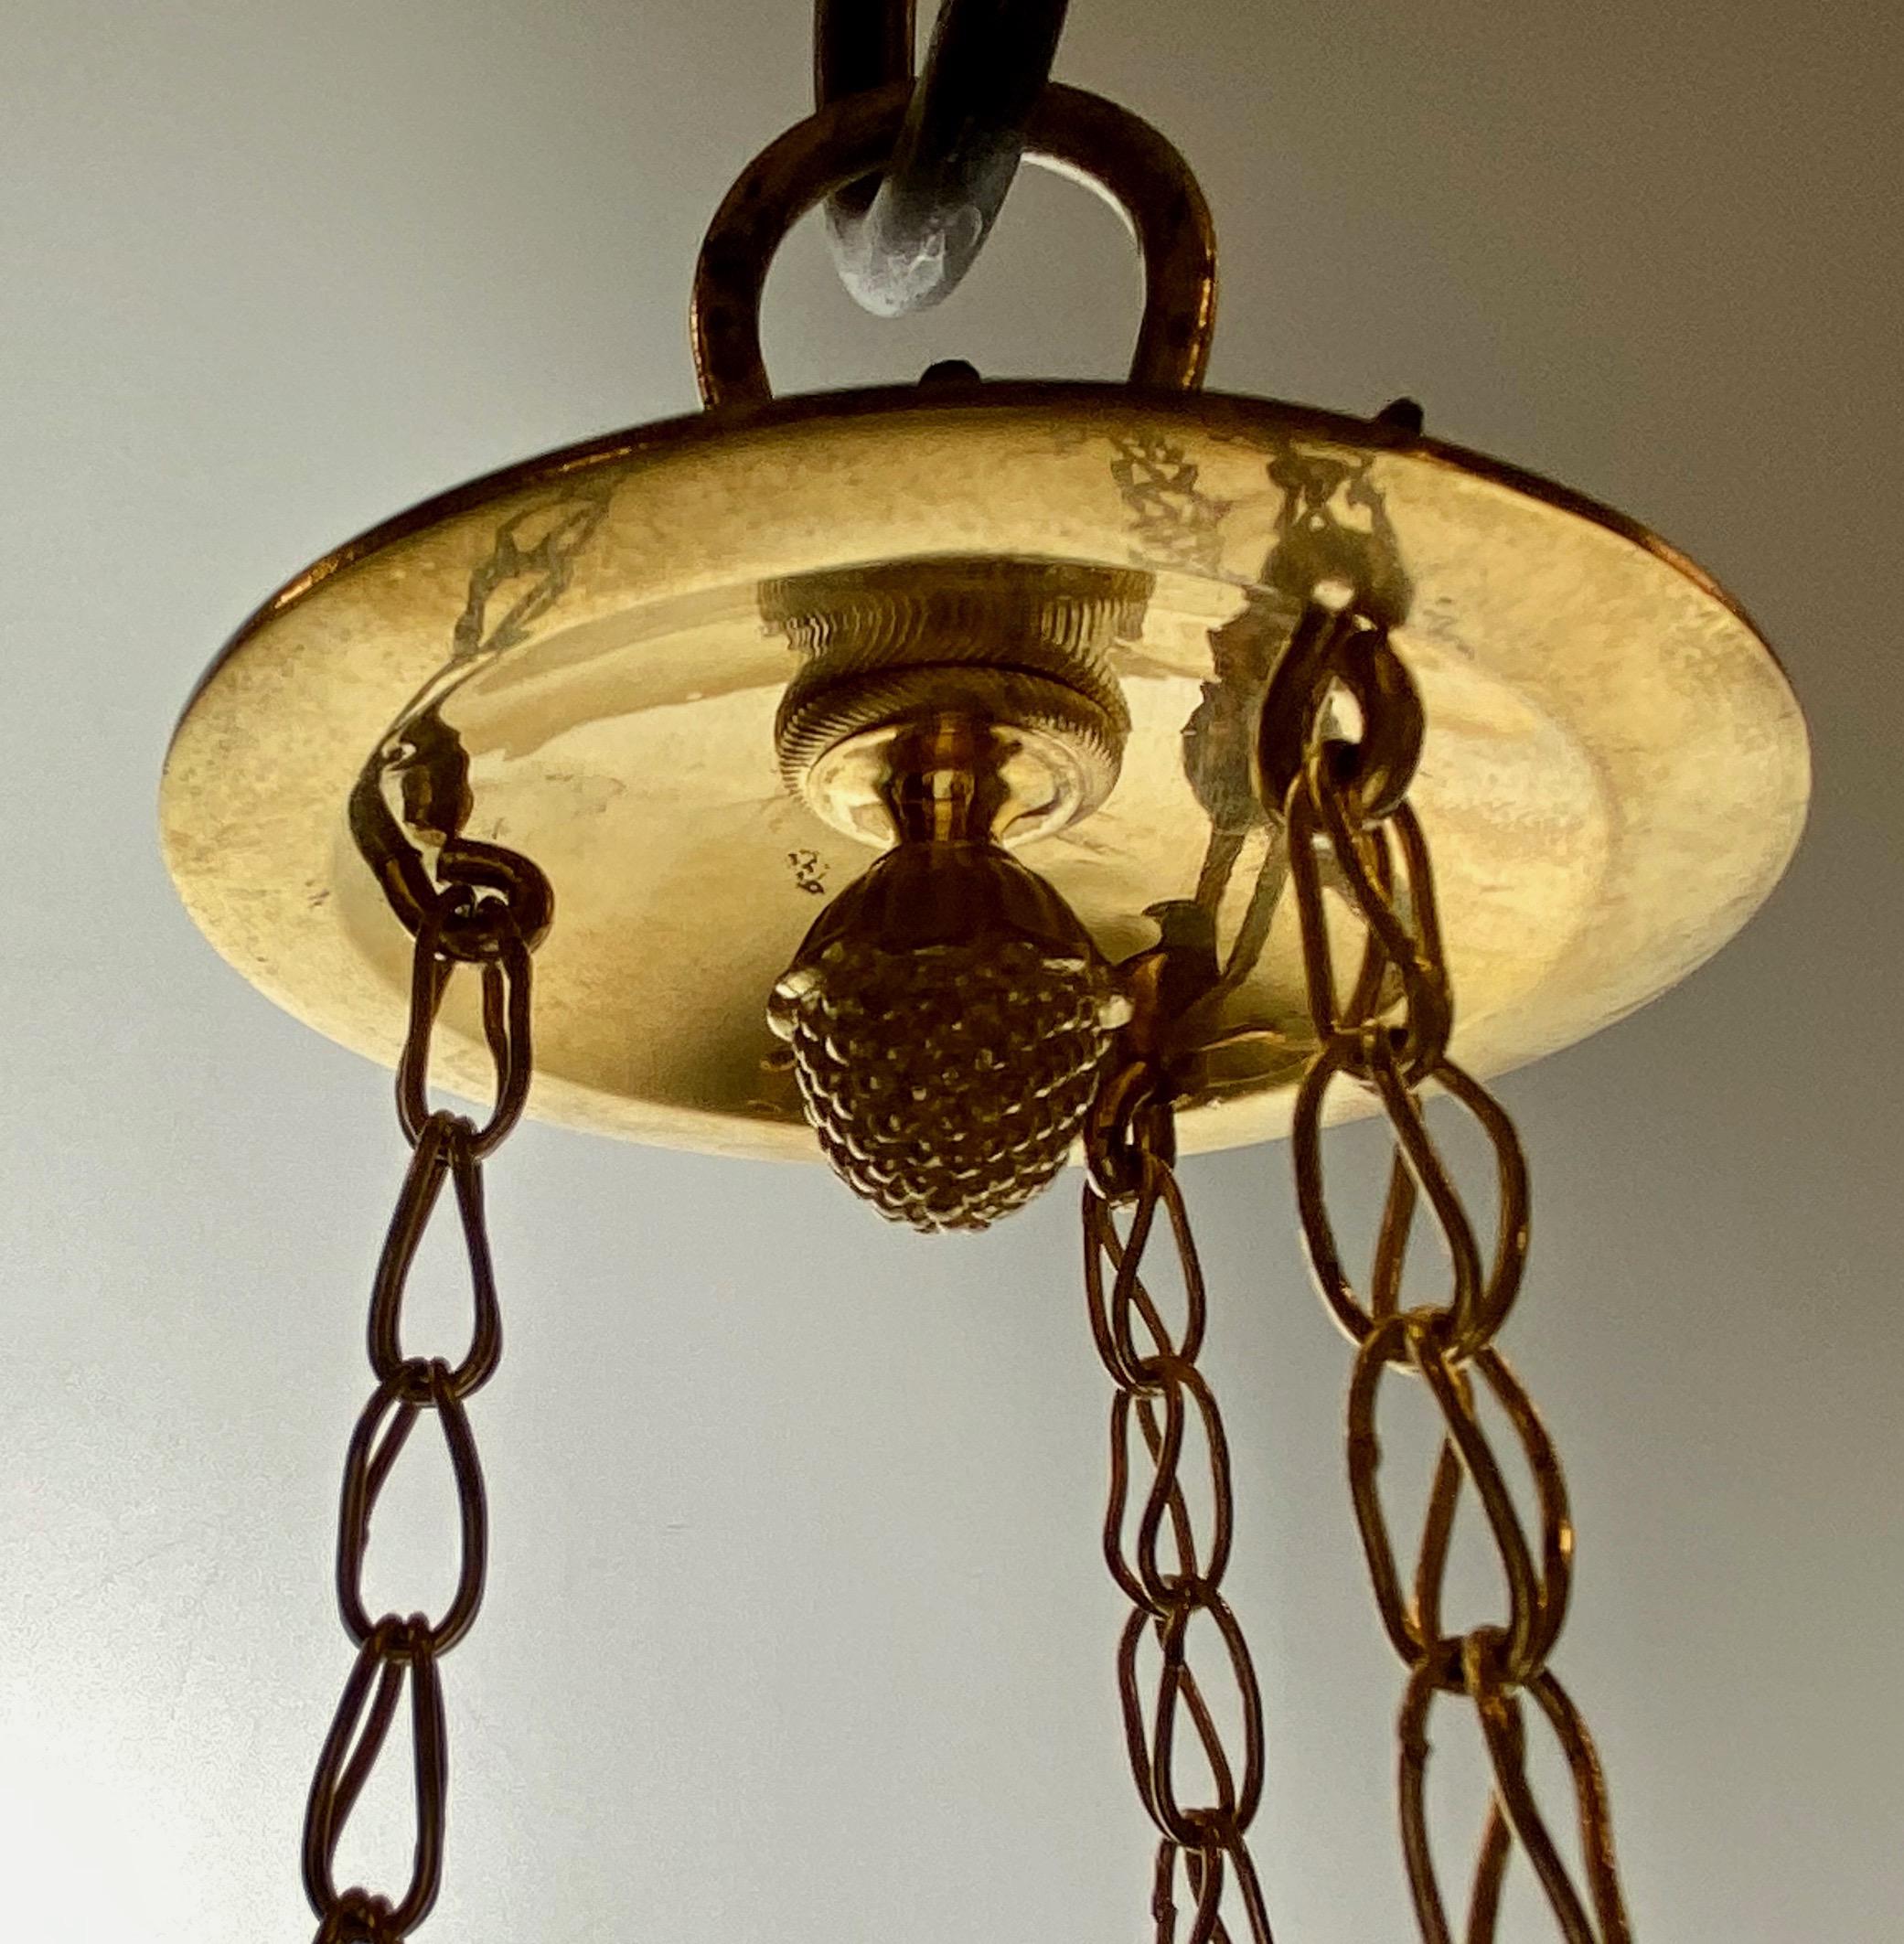 A rare Swedish Gustavian chandelier made for eight candles. This type is usually made of copper or bronceshetts shaped to the central bowl. This one is cast in bronze which was a much more expensive technique and results in a much higher level of